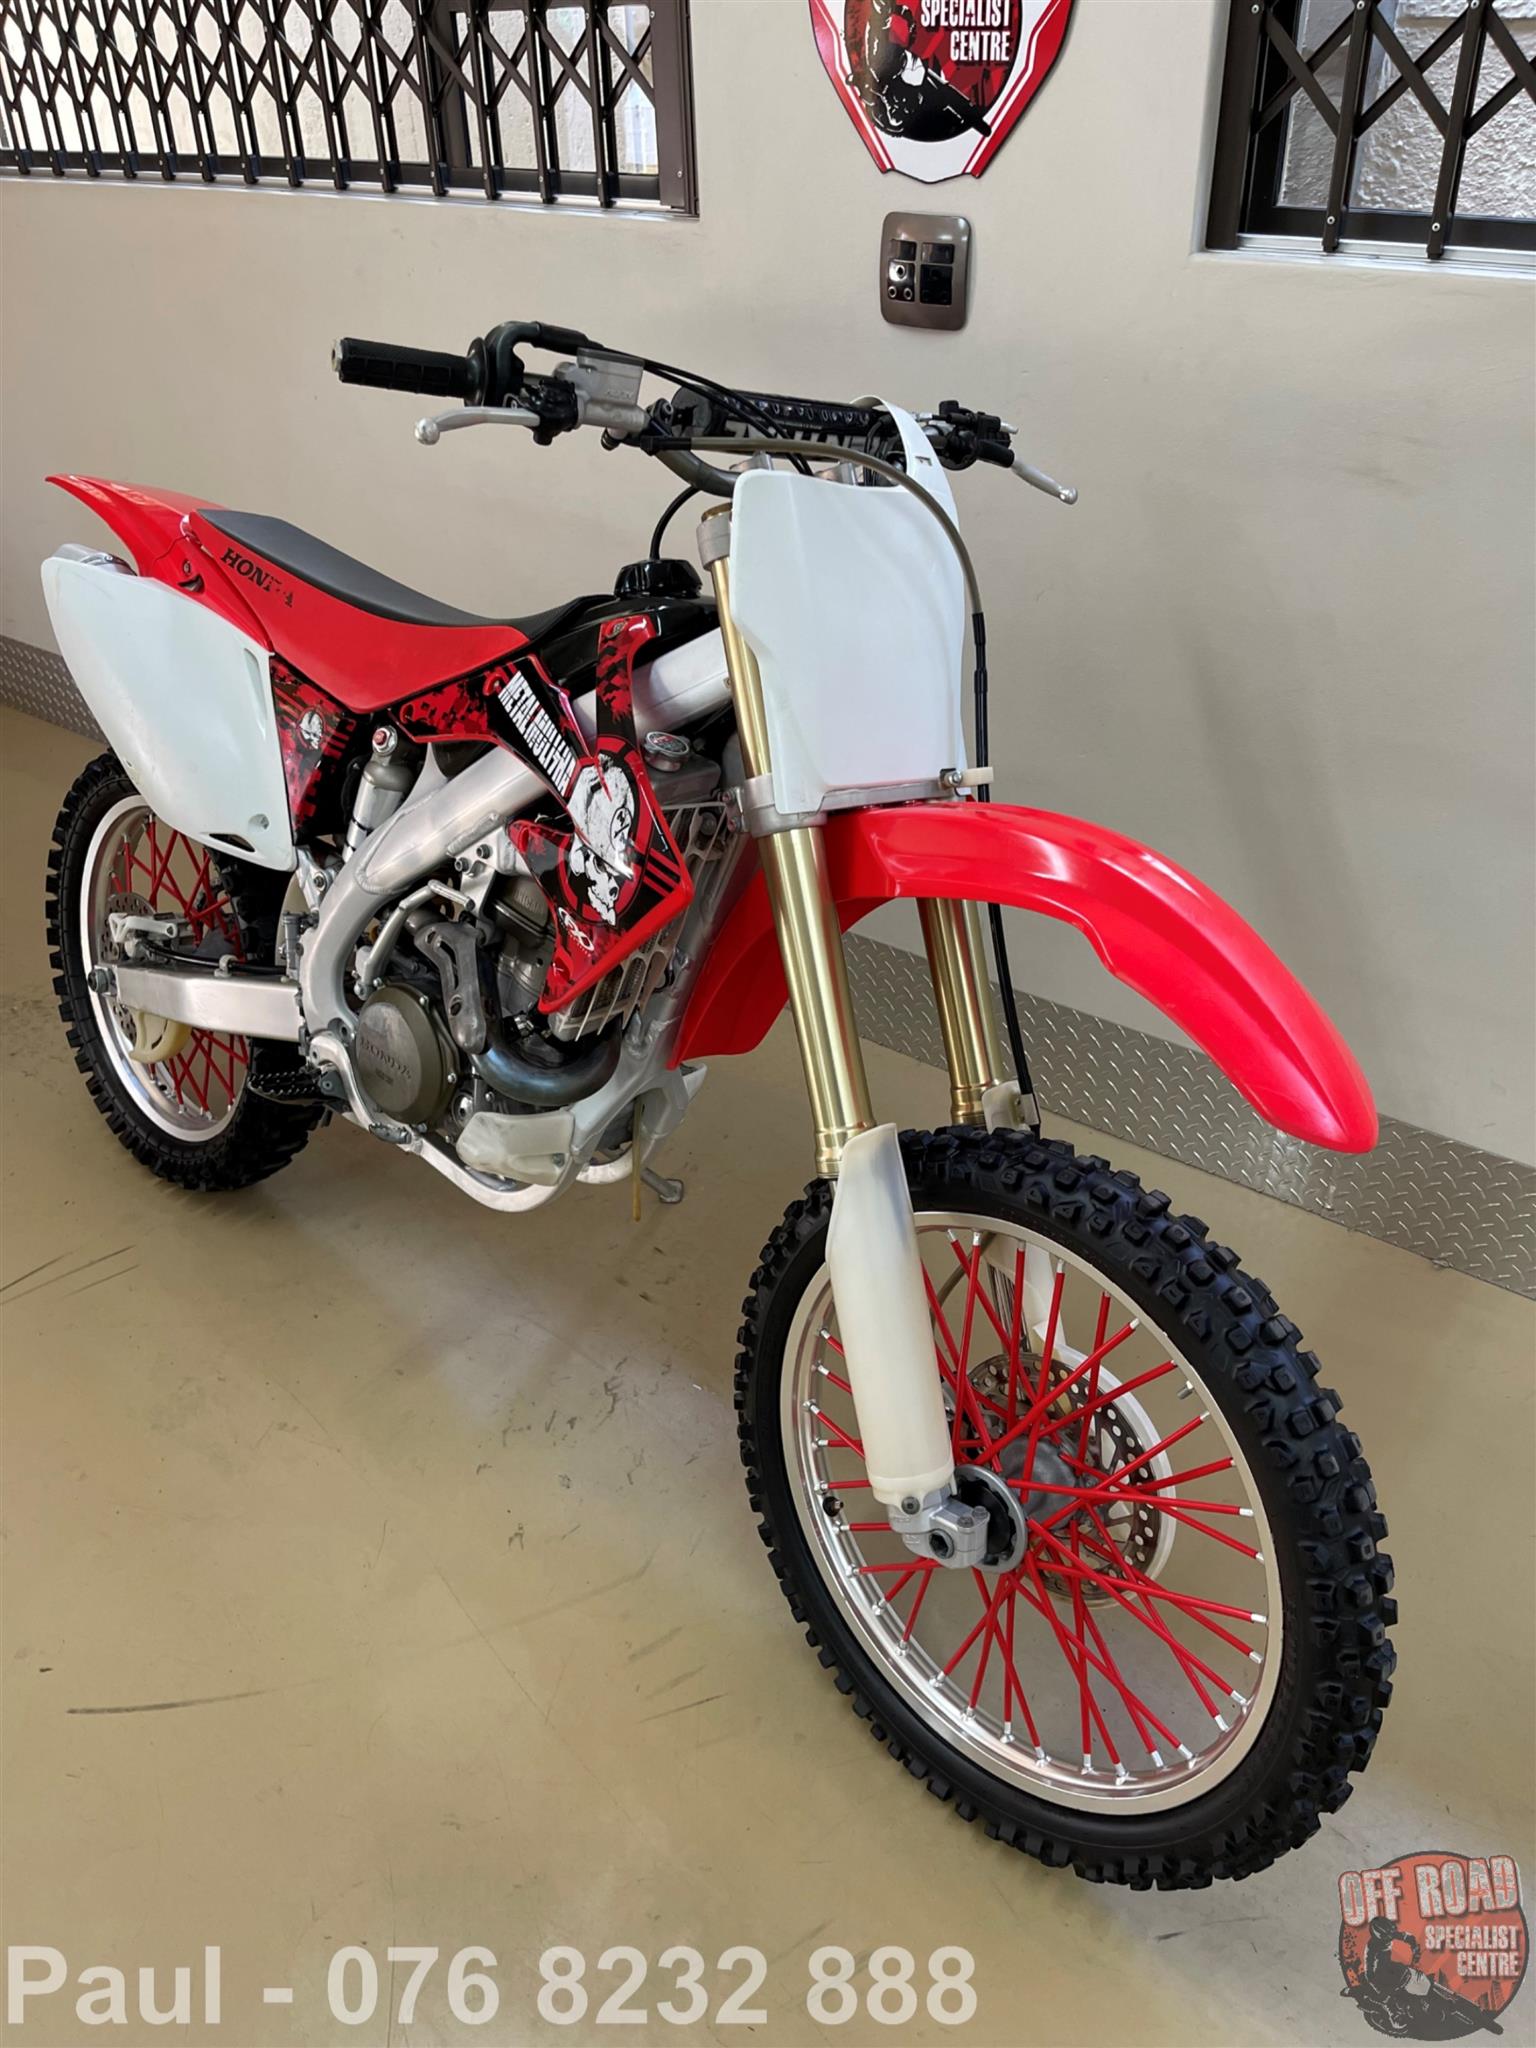 2007 HONDA CRF 450 R - MINT CONDITION | Junk Mail